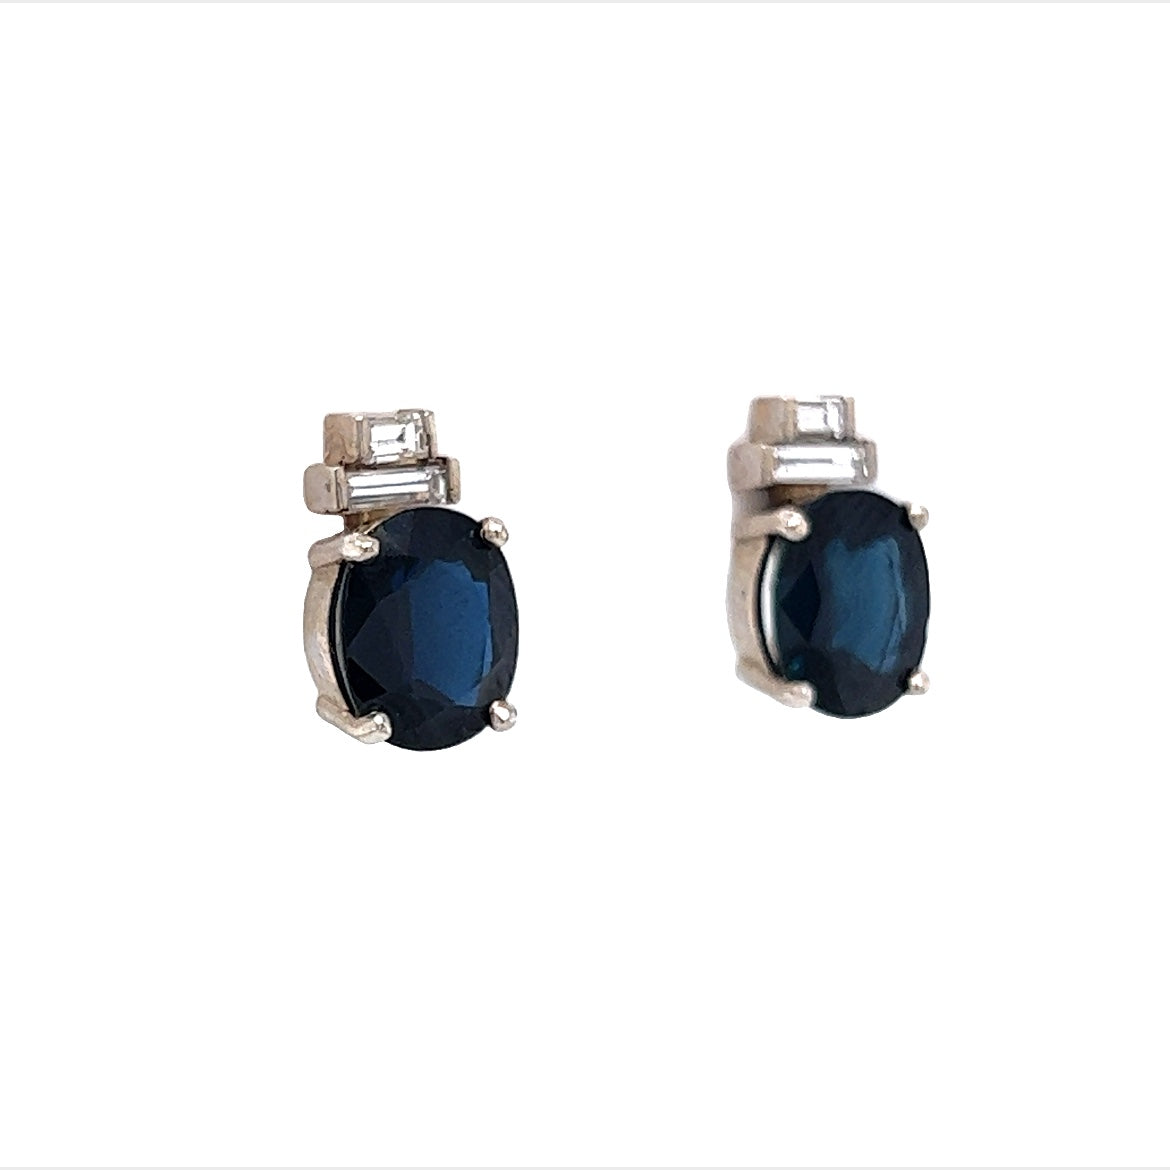 Oval Cut Sapphire and Diamond Earrings in 14K White Gold